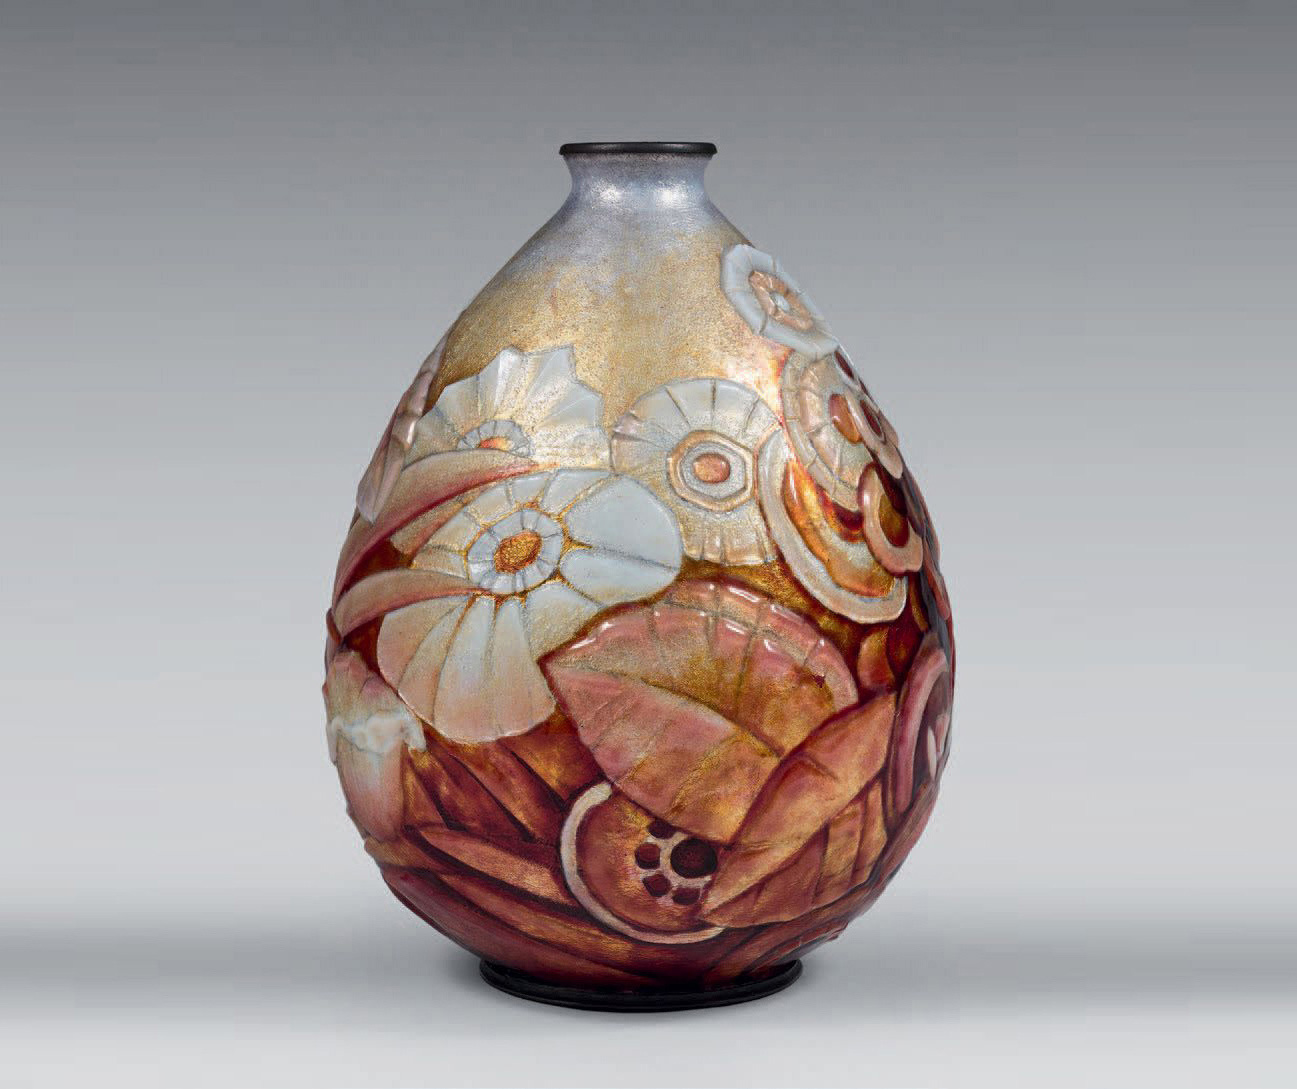 €6,440Large copper pear-shaped vase with flowers, translucent enamel, signed and located in Limoges, h. 30.5 cm/12 in.Paris, Hôtel Drouot,